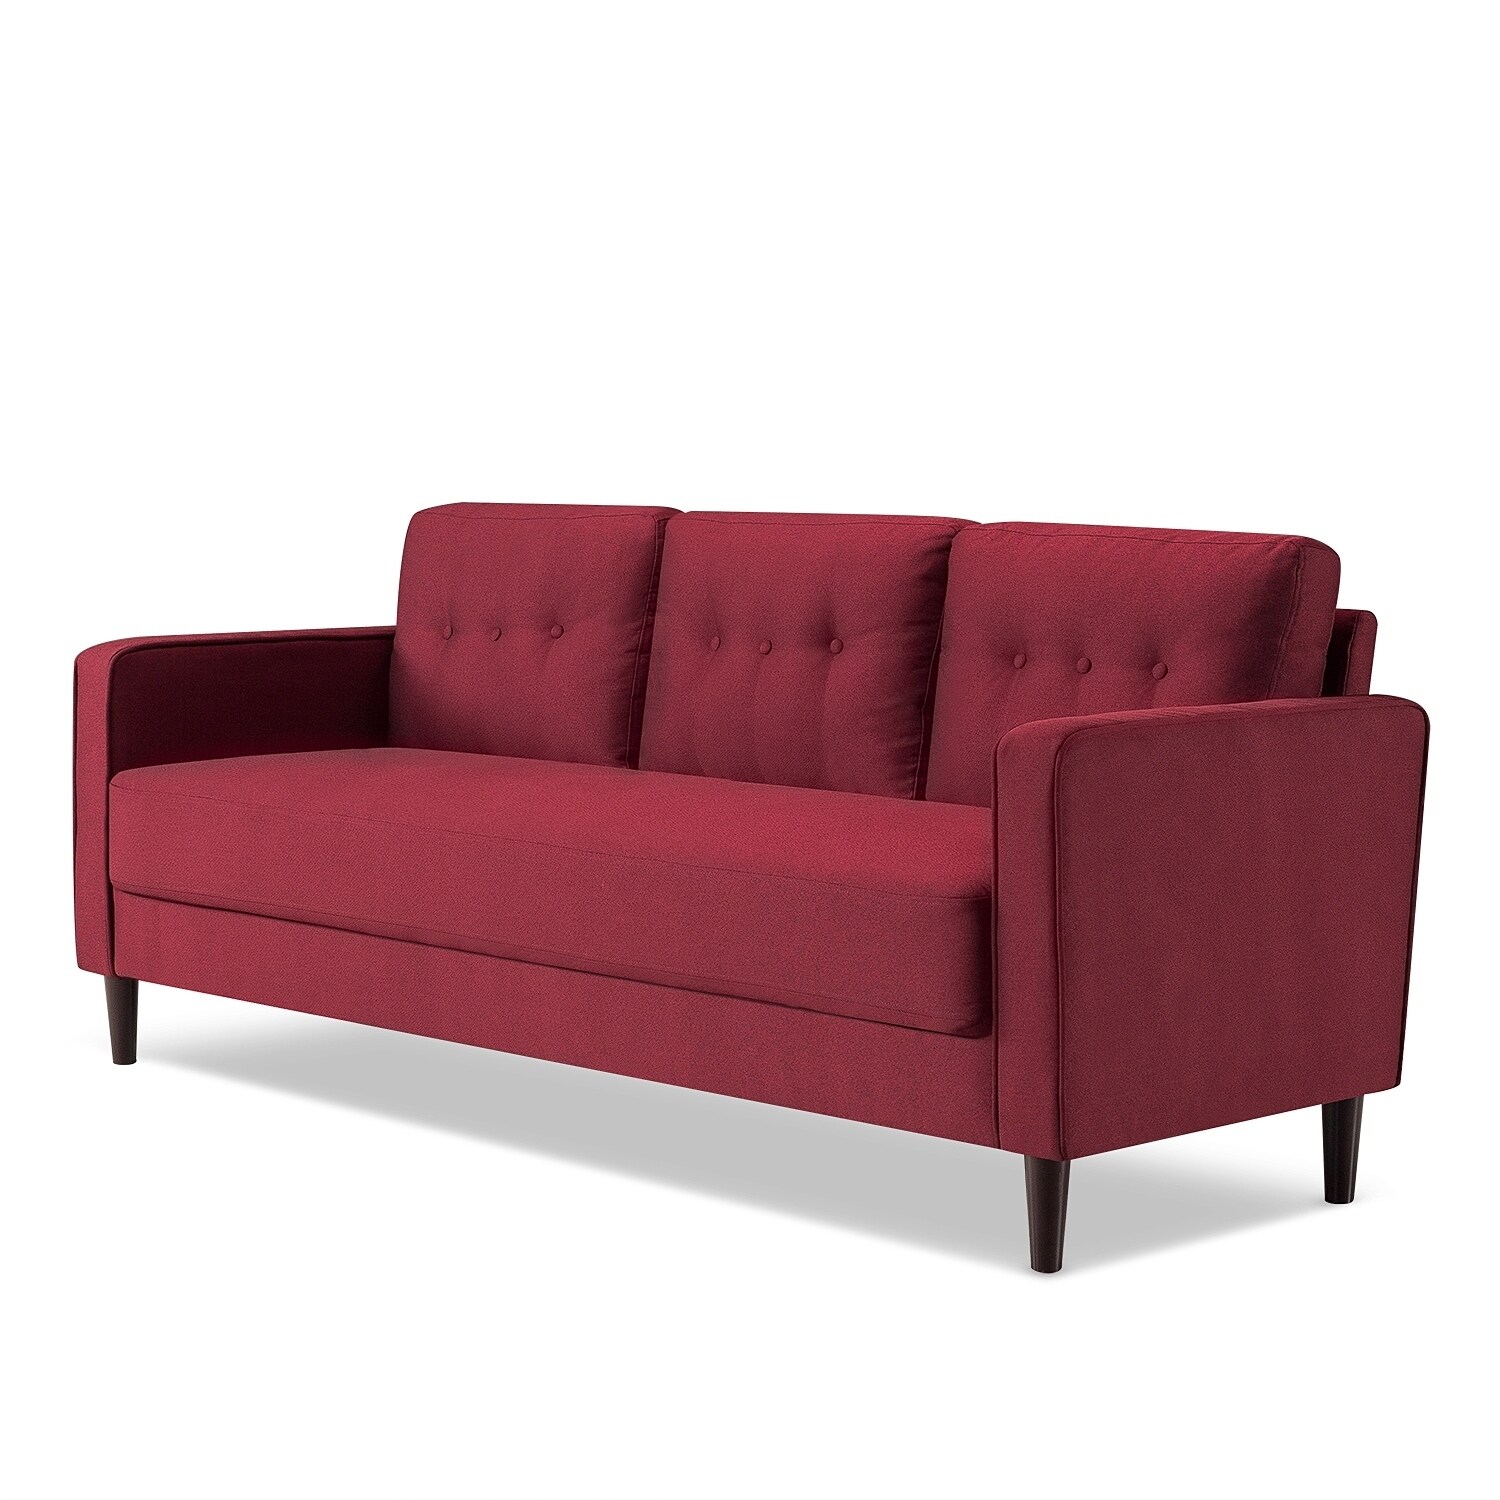 Priage by Zinus Mid-Century Sofa, Ruby Red Weave